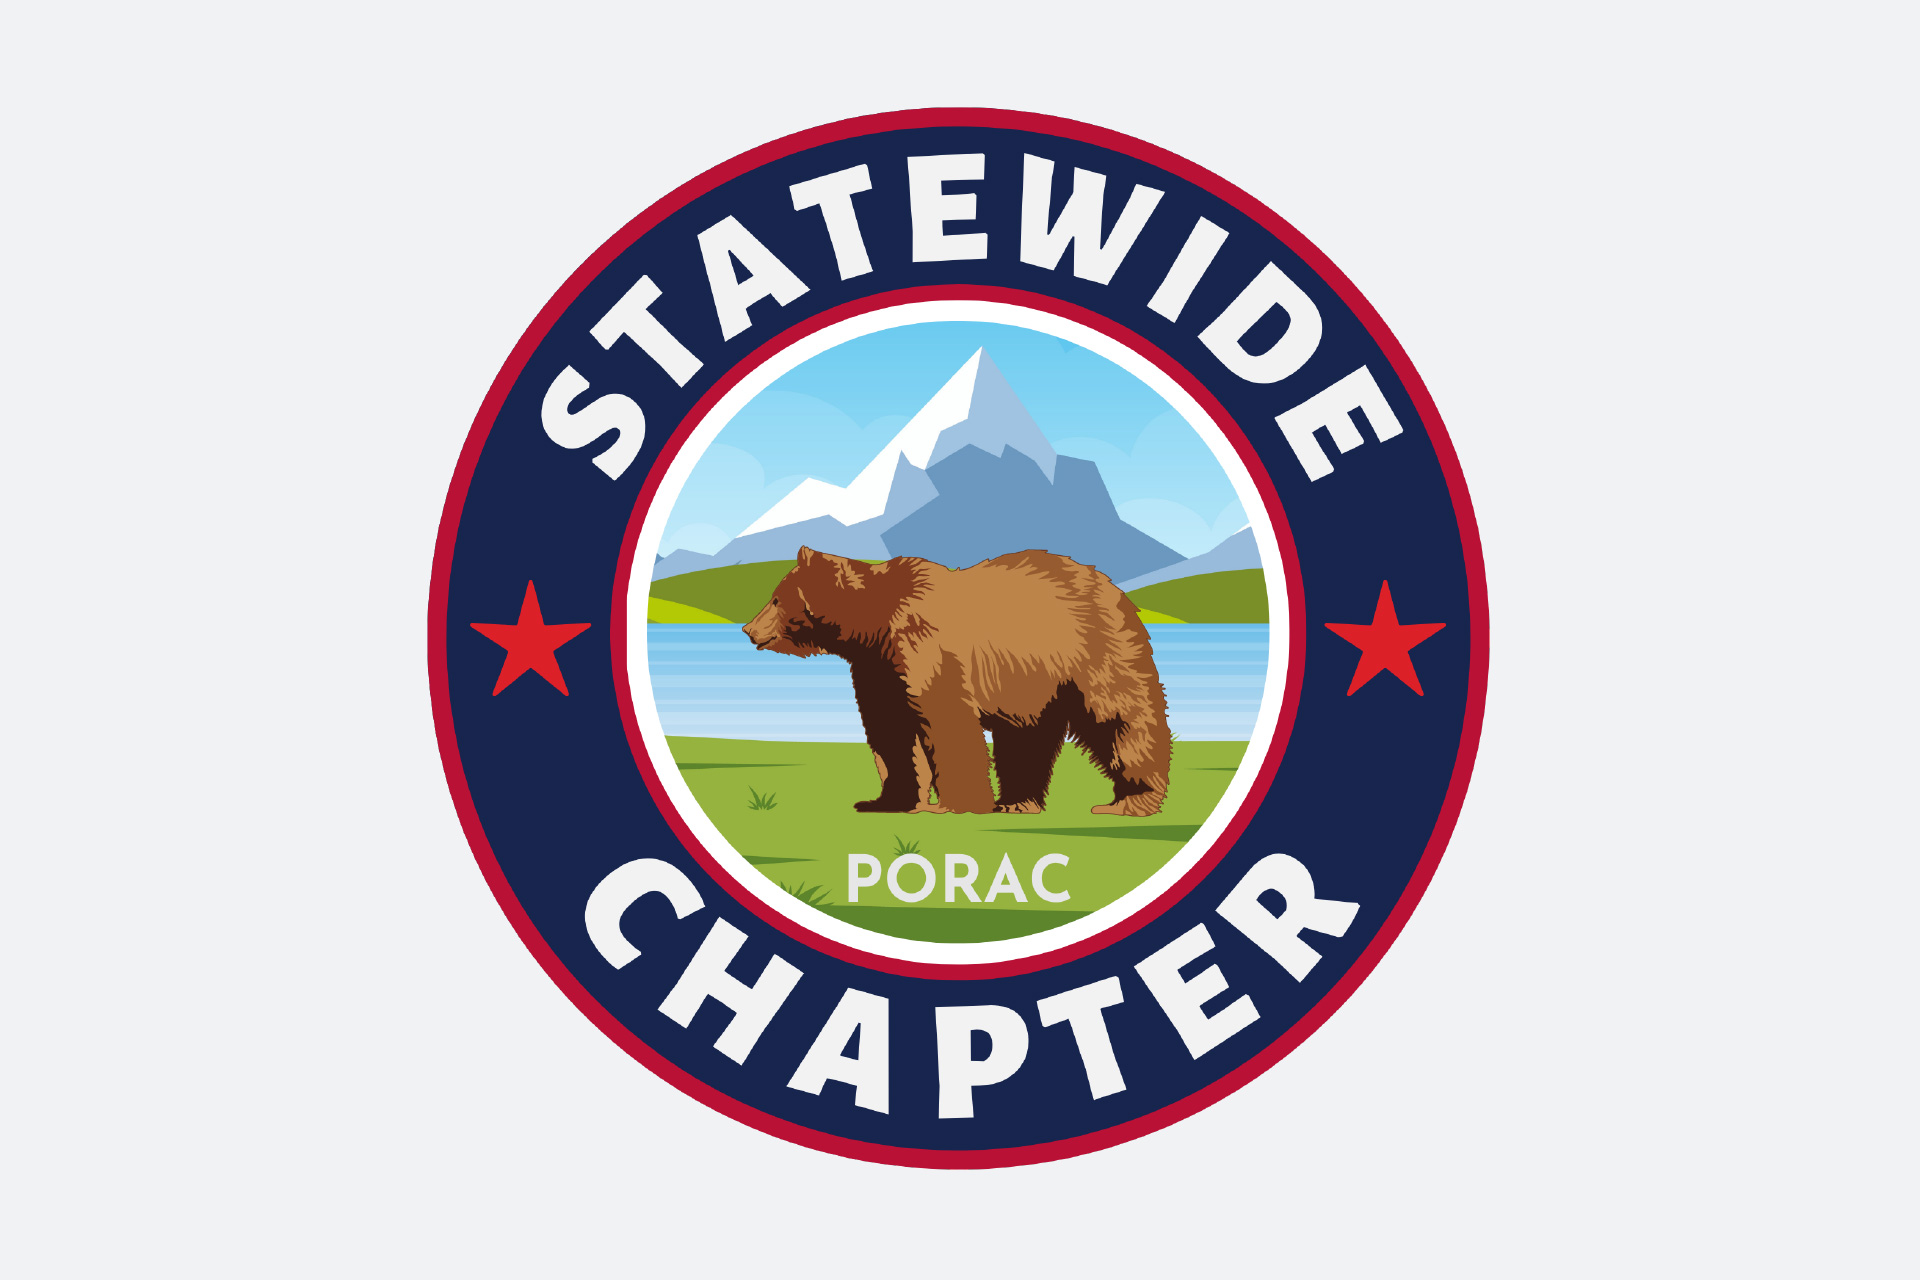 Statewide Chapter